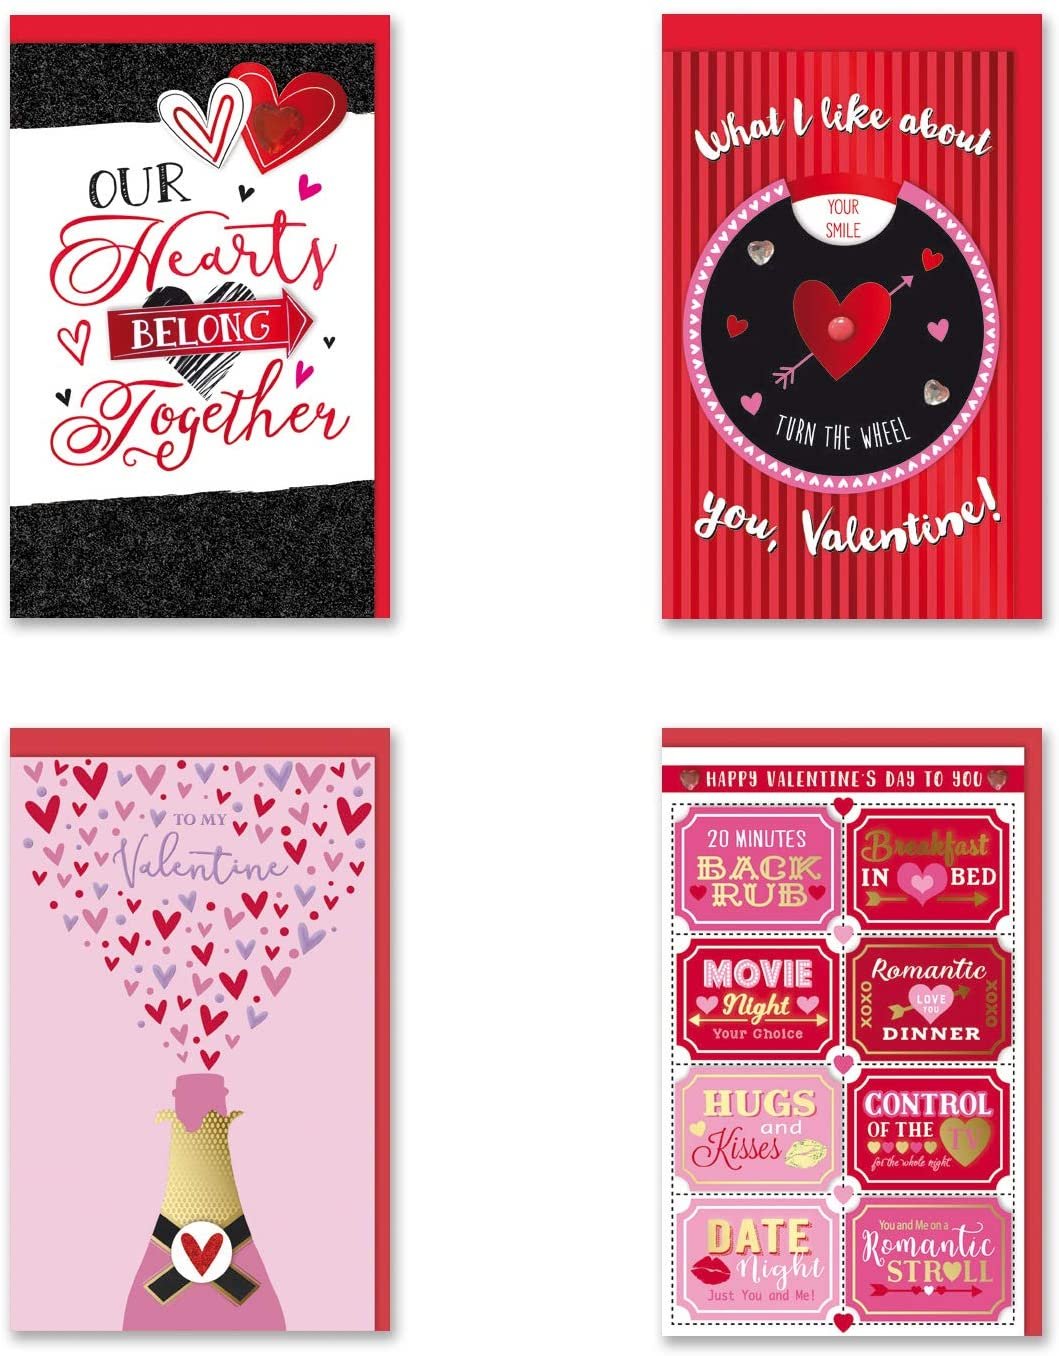 B-THERE Bundle of 4 Valentine's Day Handmade Cards – Large. Envelopes Included